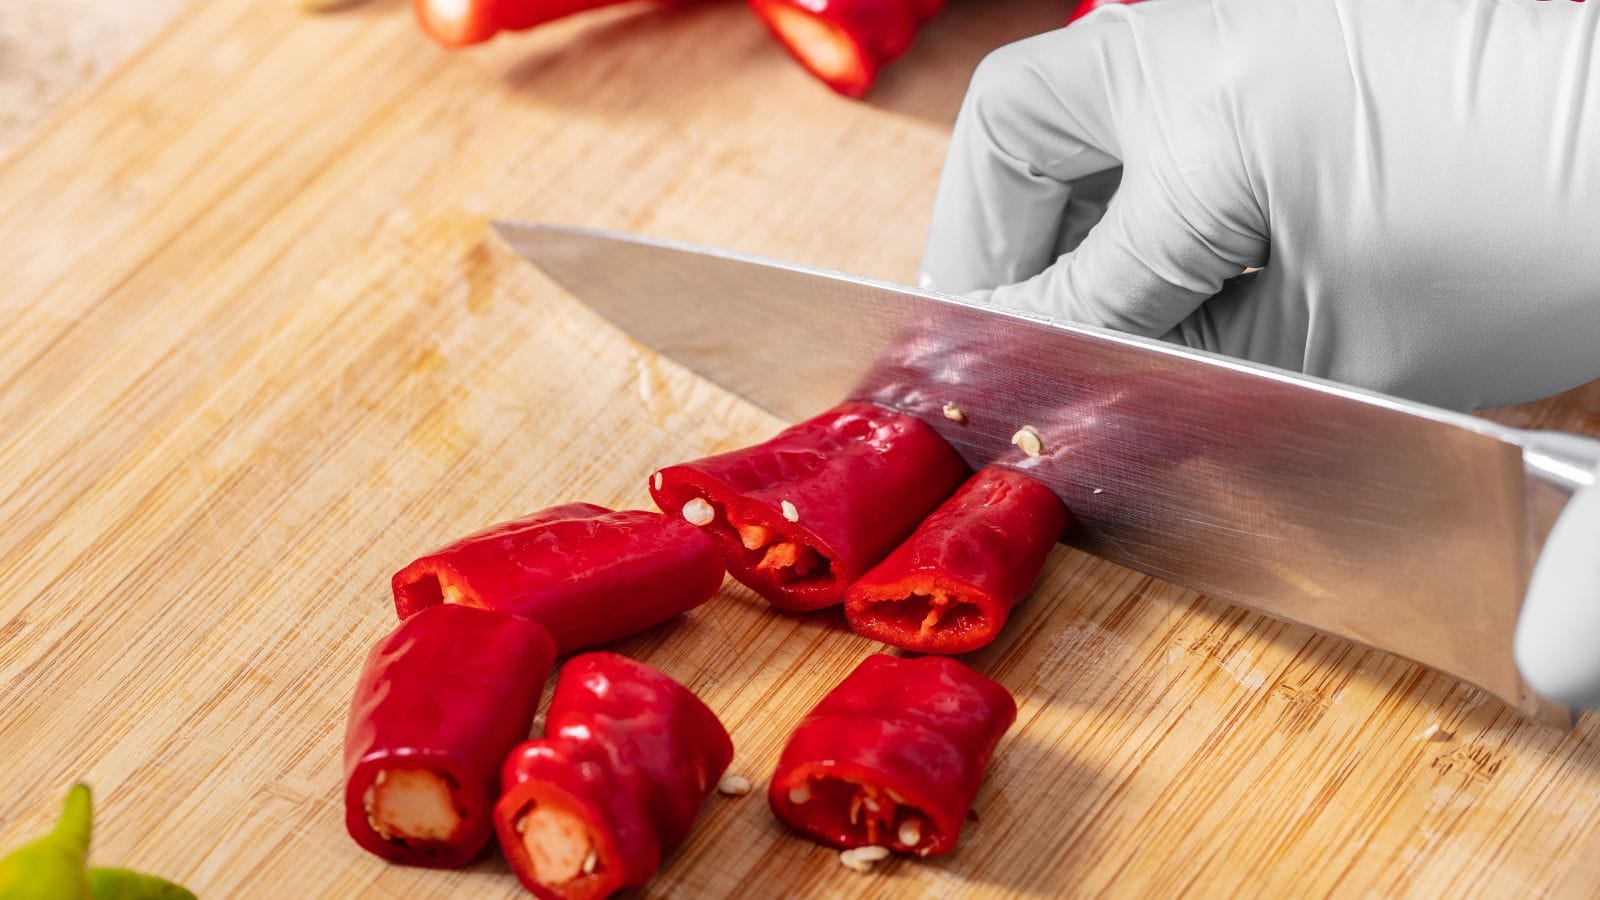 Cutting chilies with gloves closeup